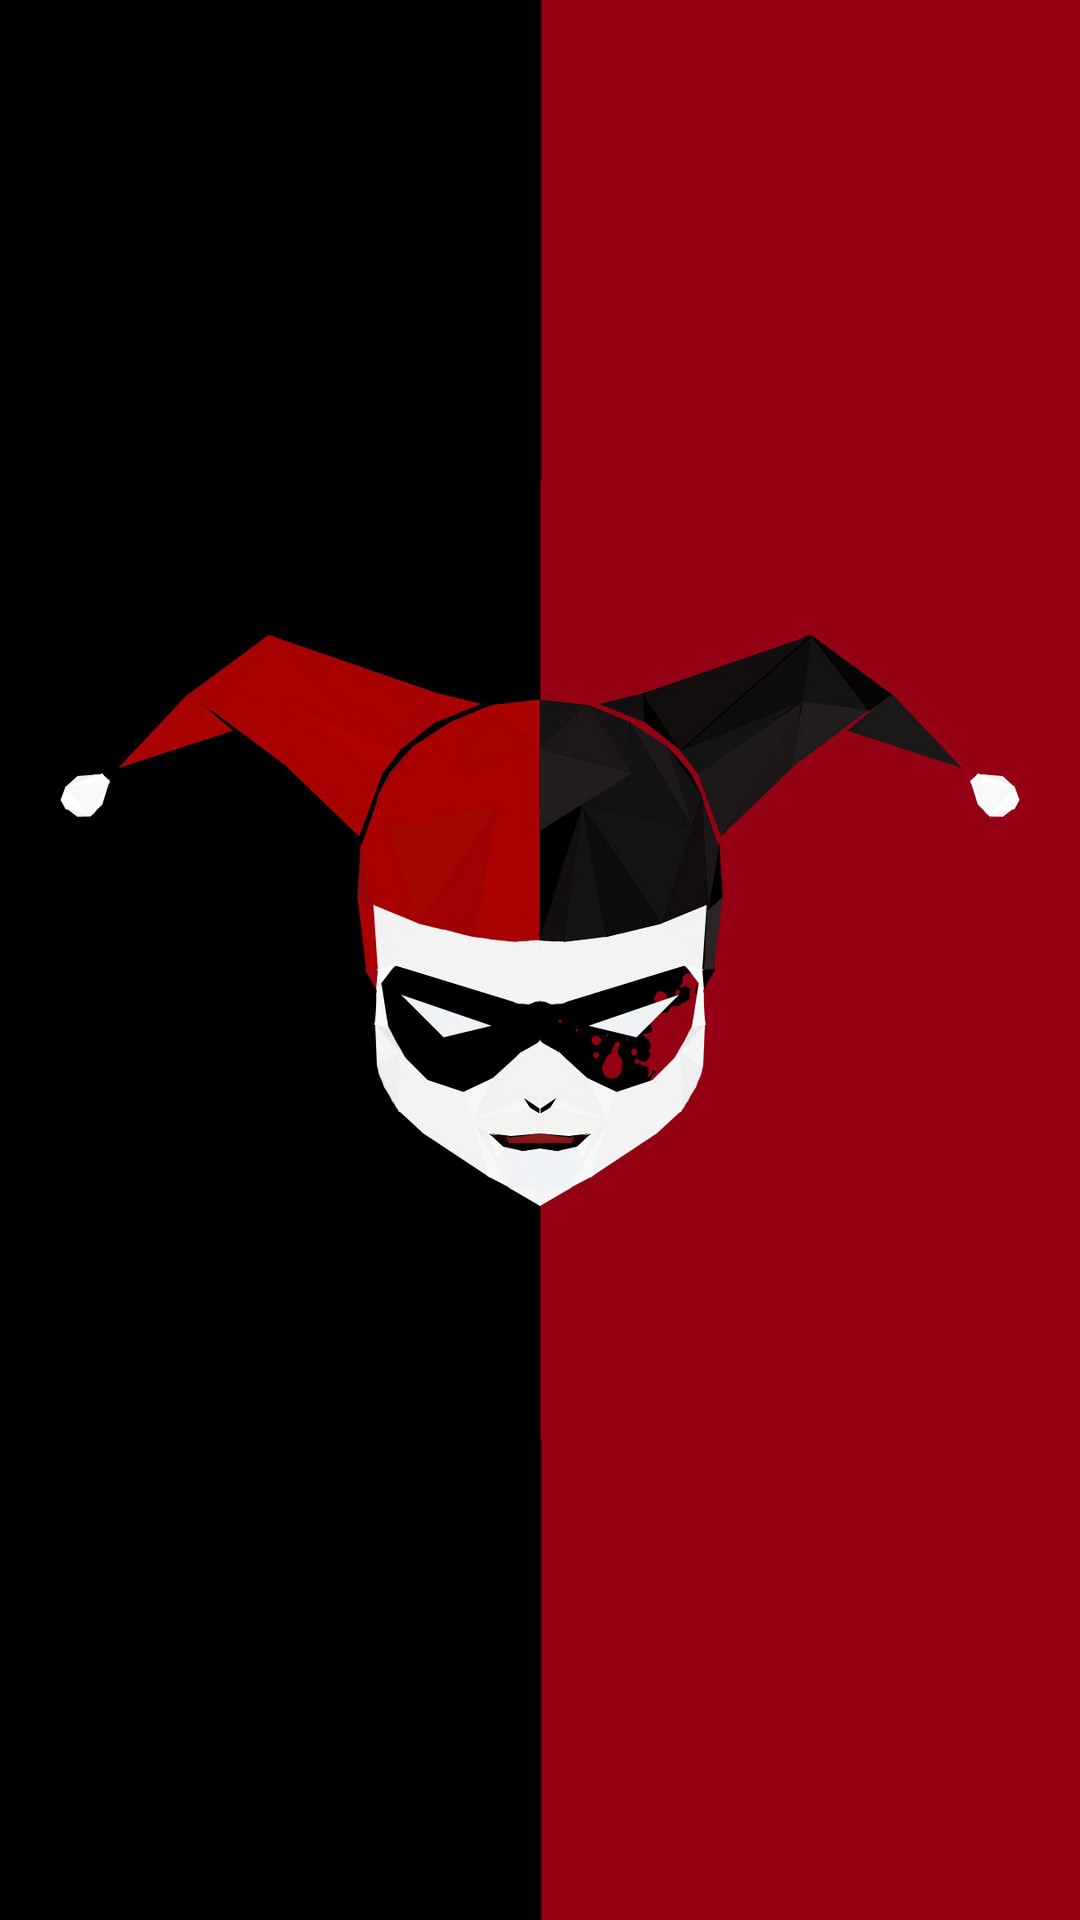 Harley Quinn Movie iPhone X Wallpaper with resolution 1080X1920 pixel. You can use this wallpaper as background for your desktop Computer Screensavers, Android or iPhone smartphones